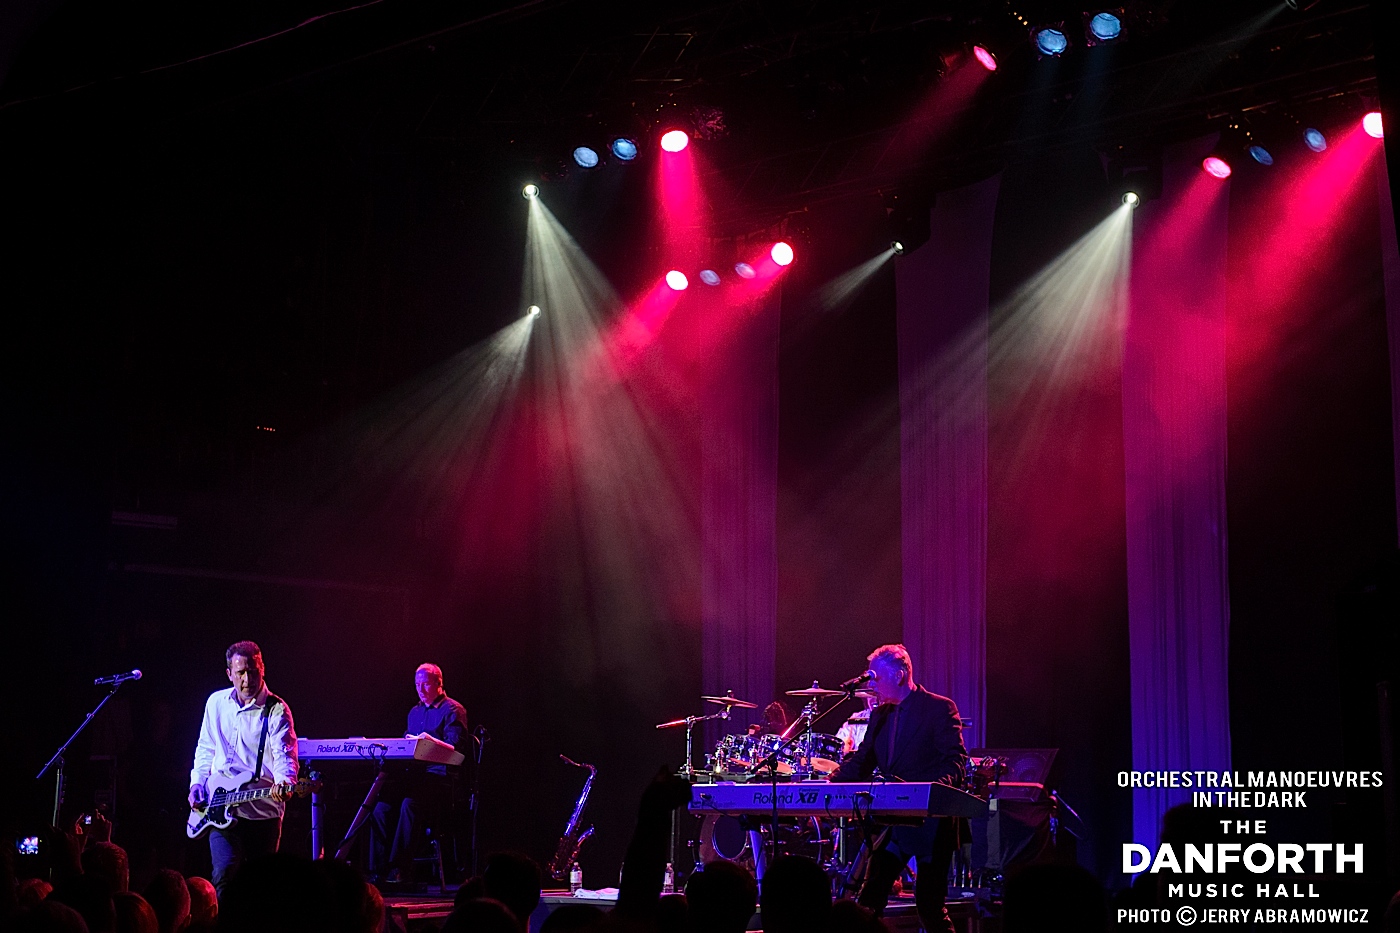 20130711 Orchestral Manoeuvres in the Dark at The Danforth Music Hall 0087